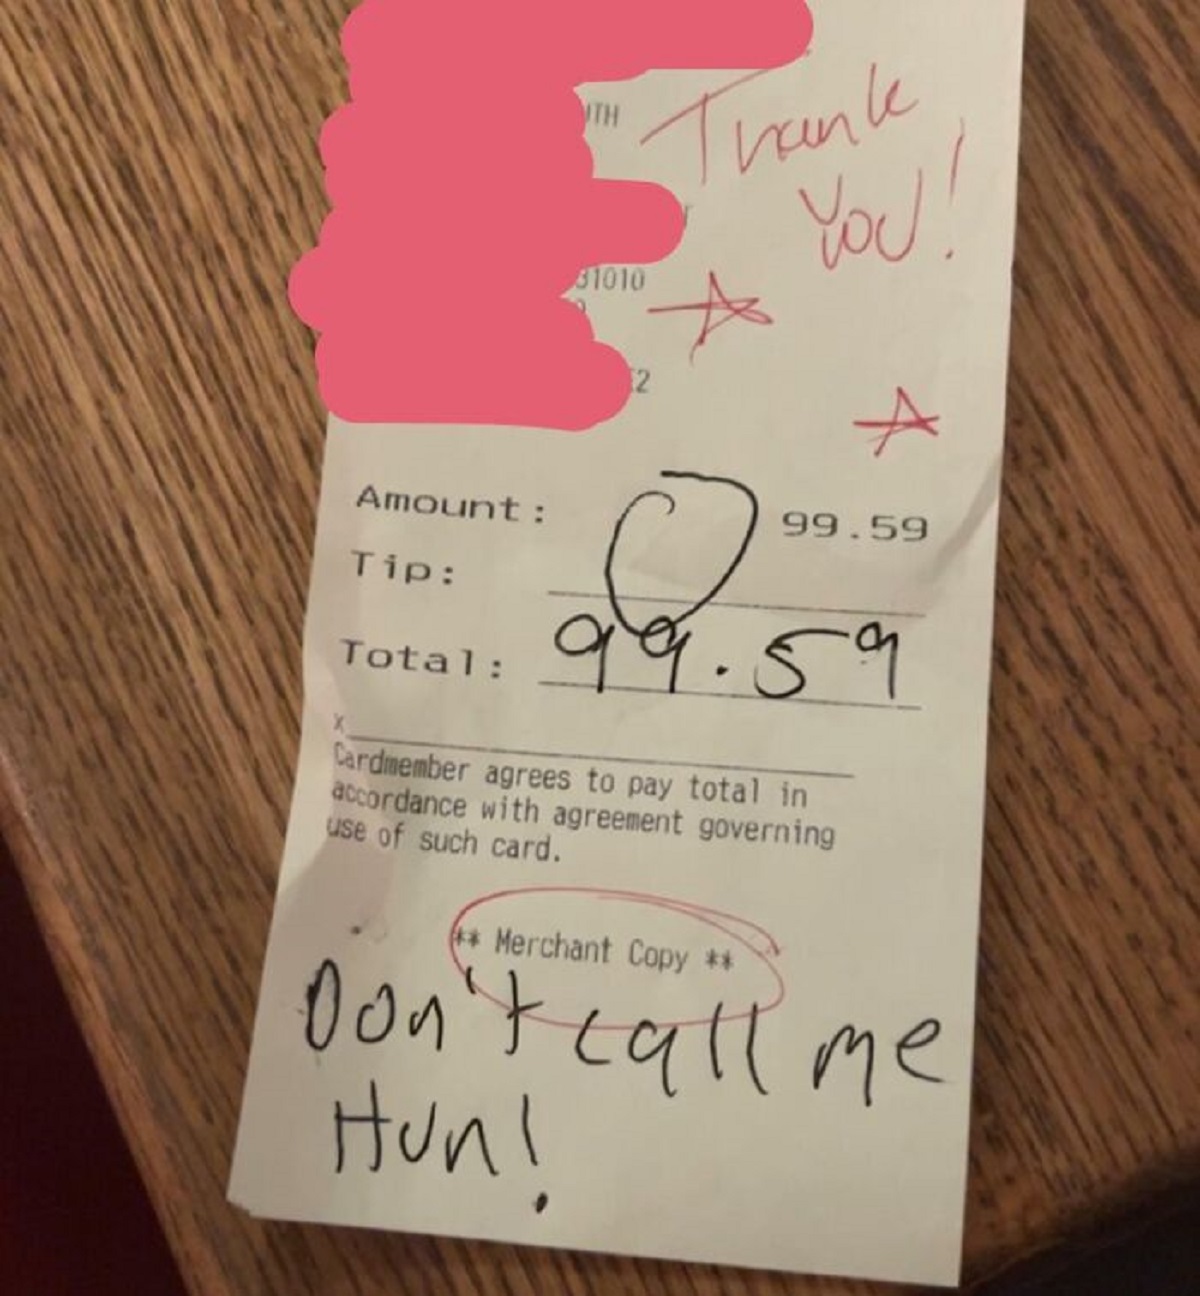 bad customers -  paper - Amount Tip Total Thank You! 31010 2 A 99.59 99.59 Cardmember agrees to pay total in accordance with agreement governing use of such card. Merchant Copy Don't call me Hun!